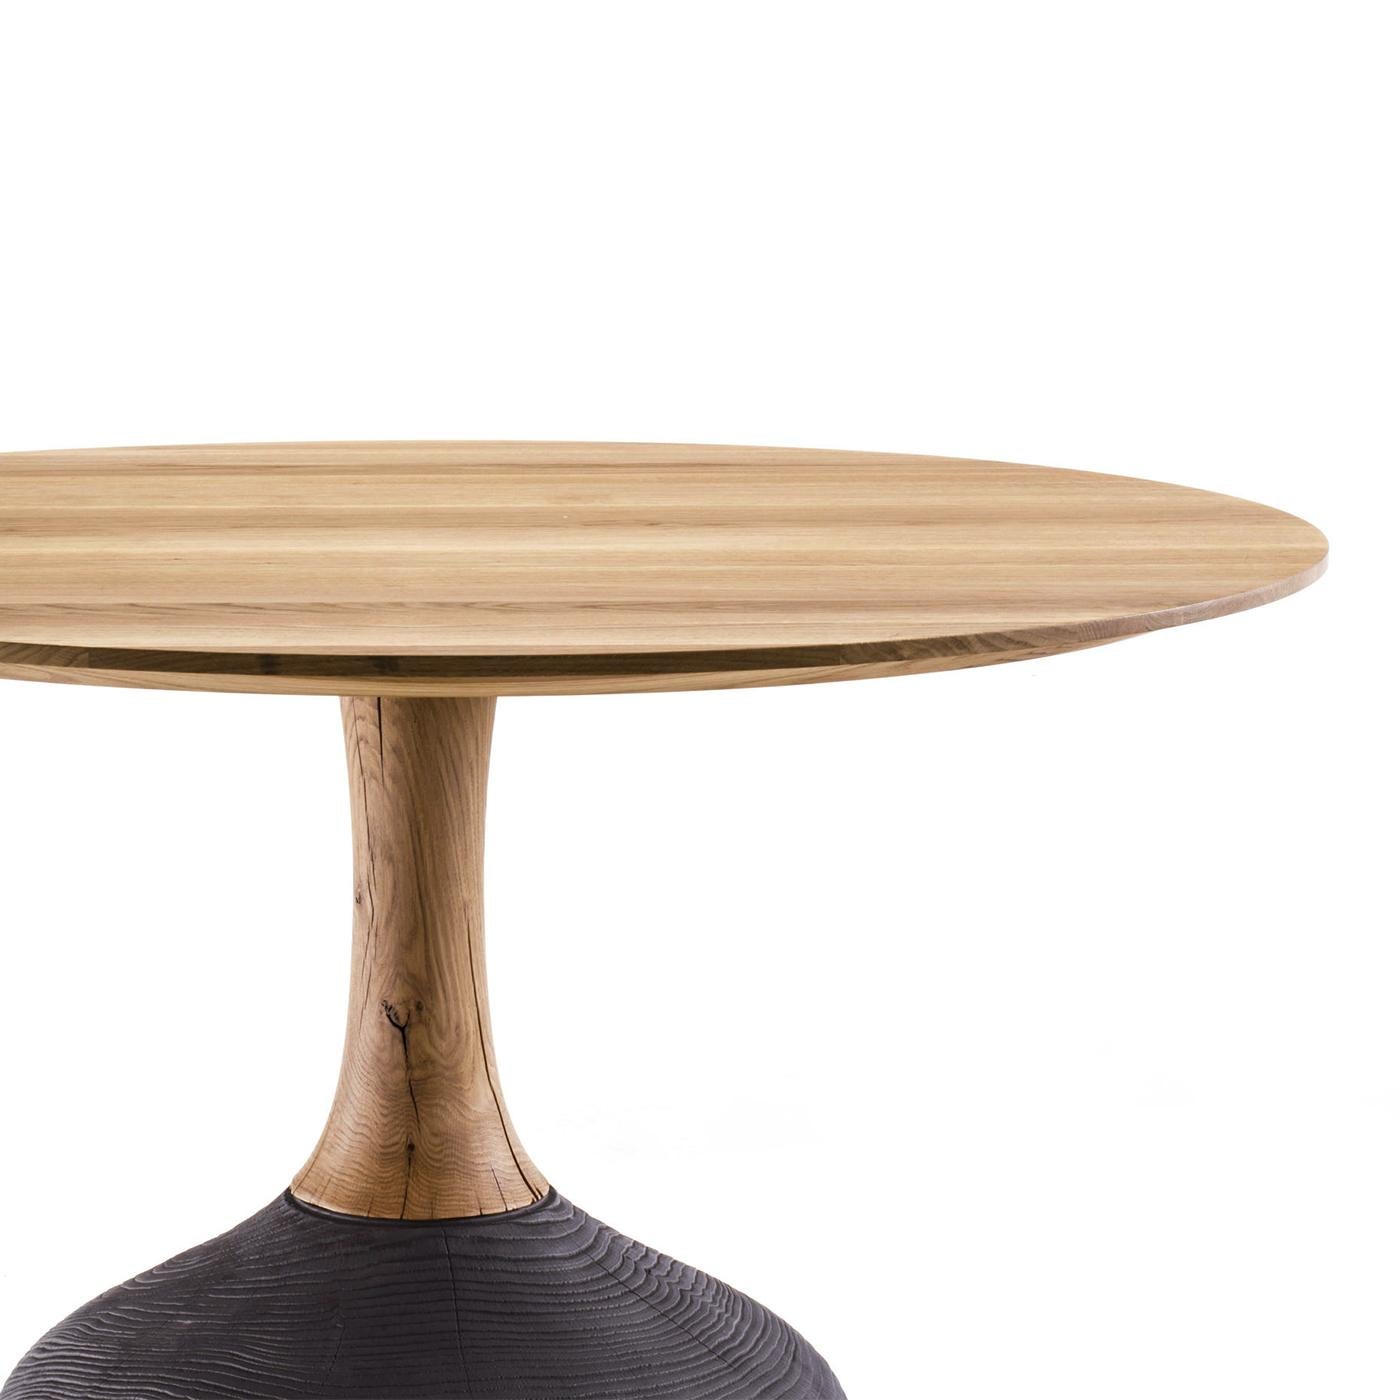 Italian Ennio Round Dining Table For Sale